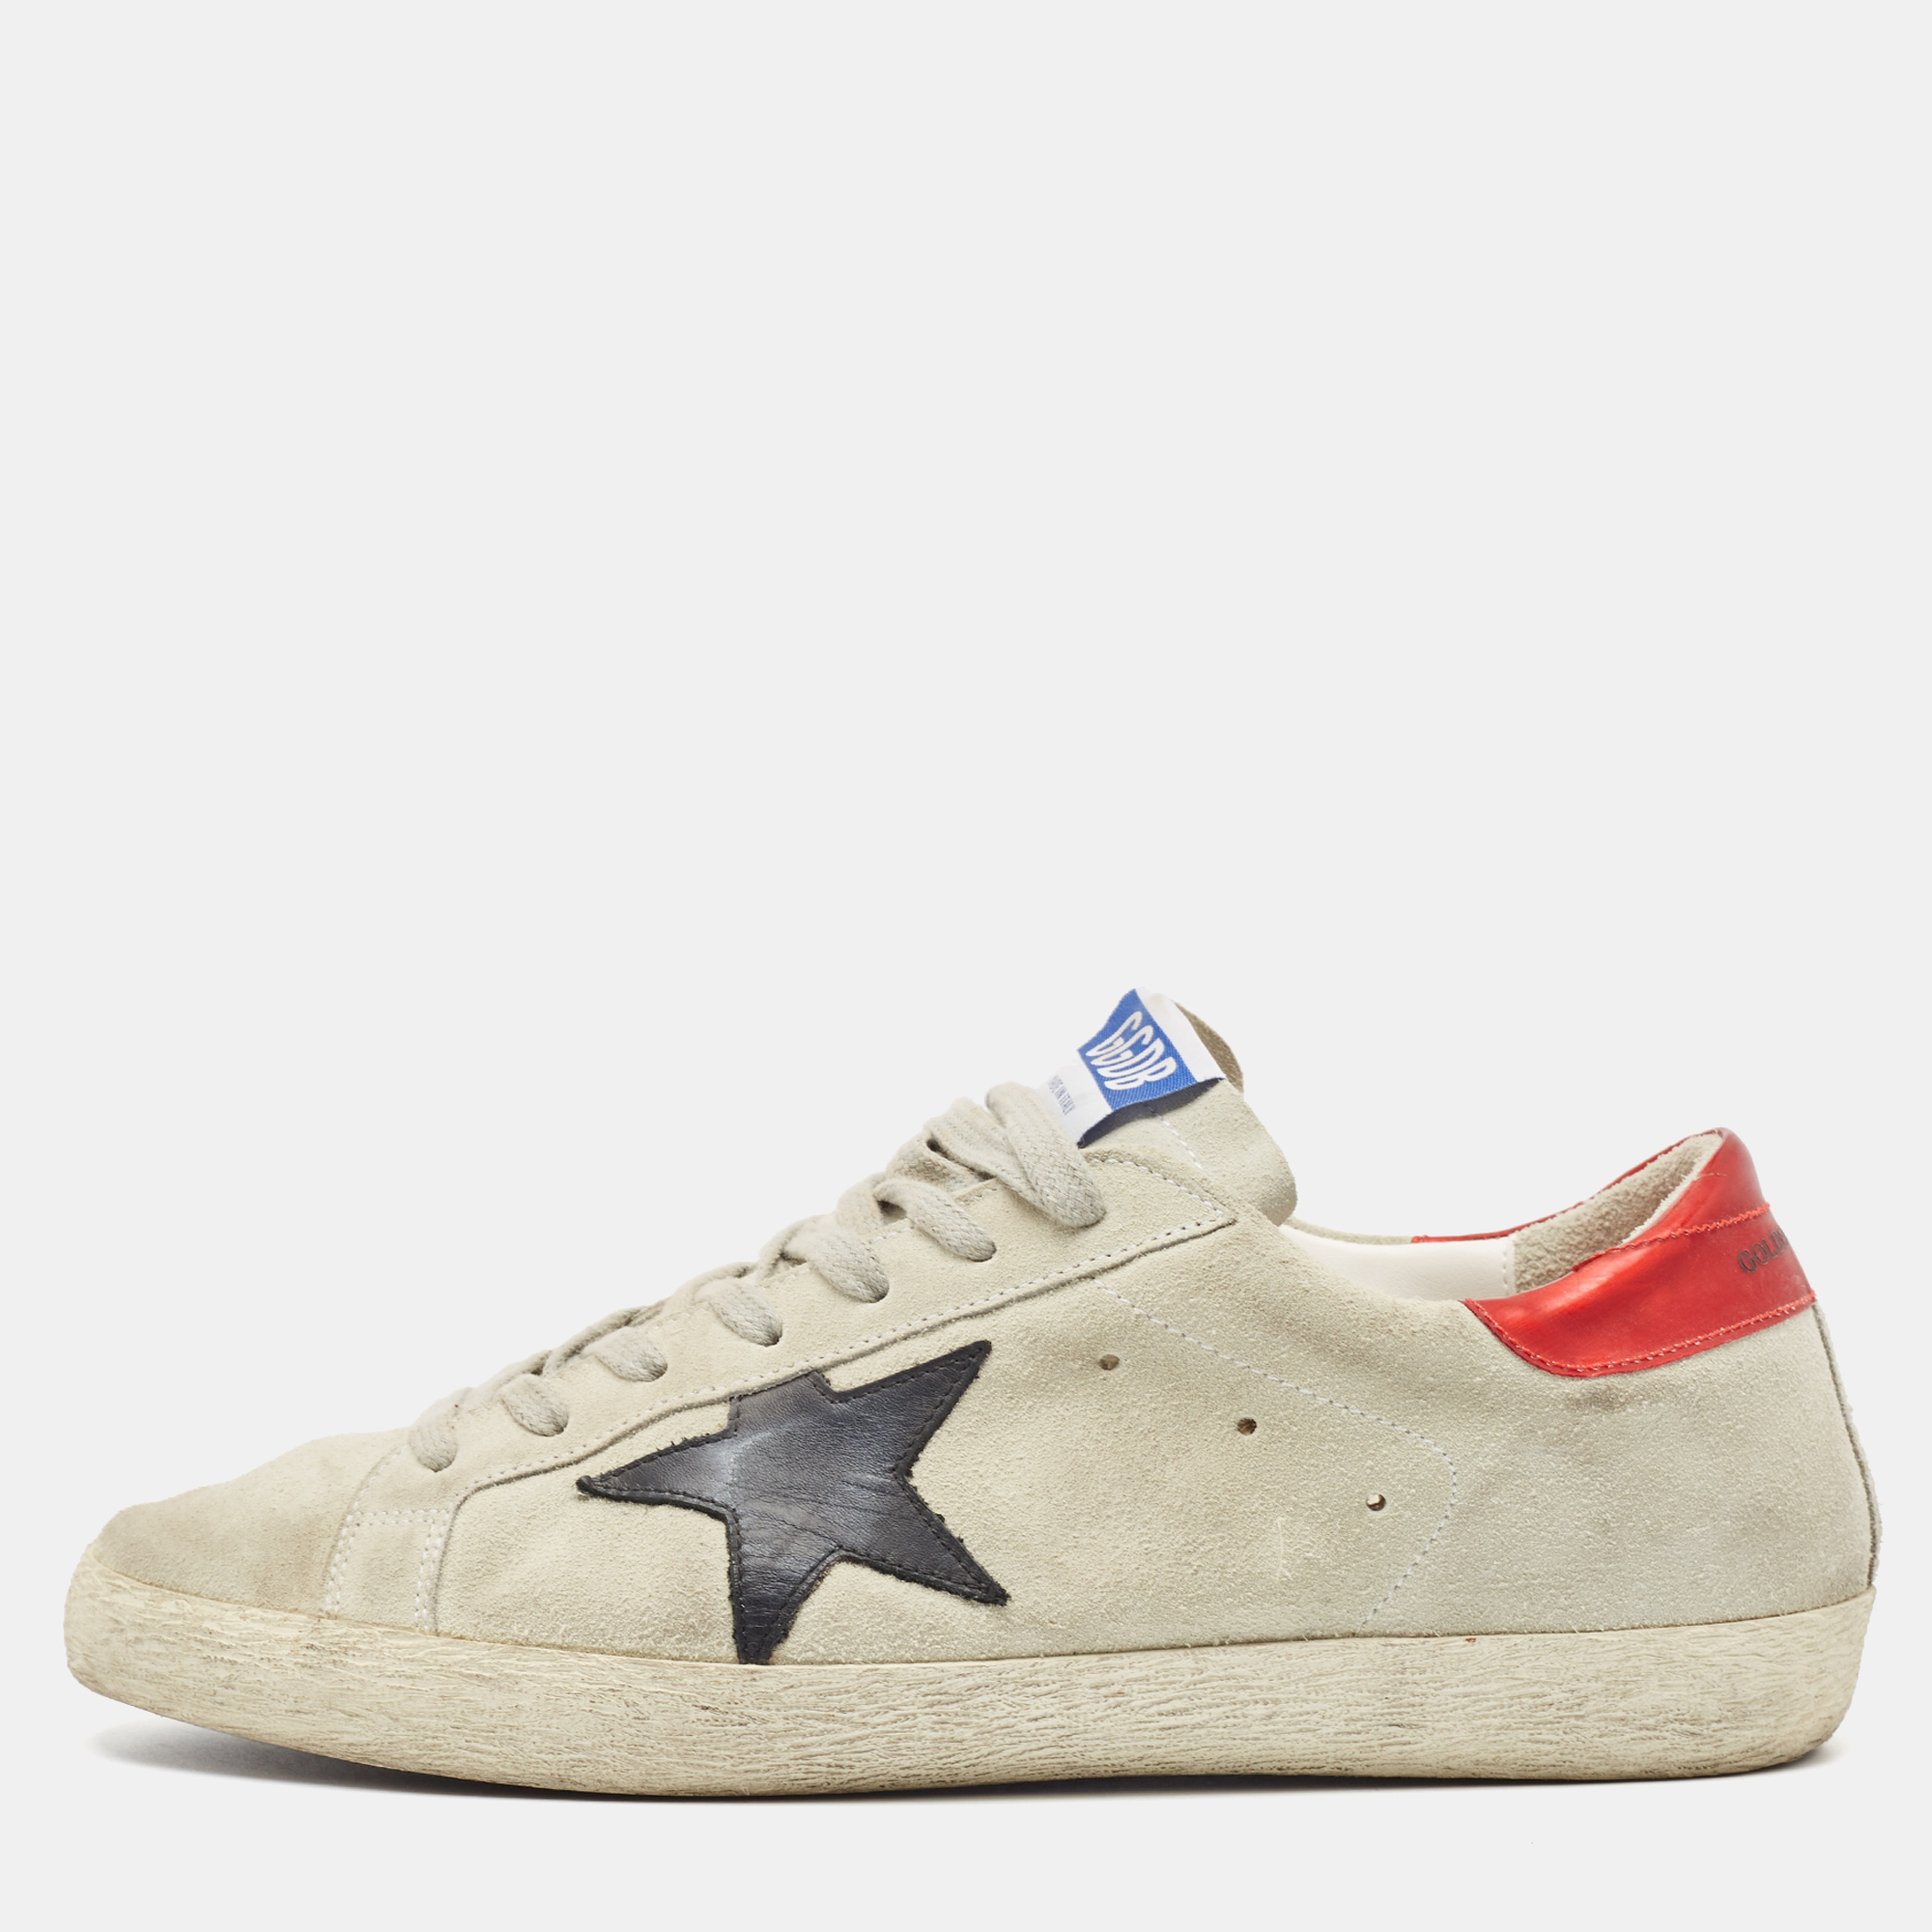 

Golden Goose Grey Suede and Leather Superstar Sneakers Size